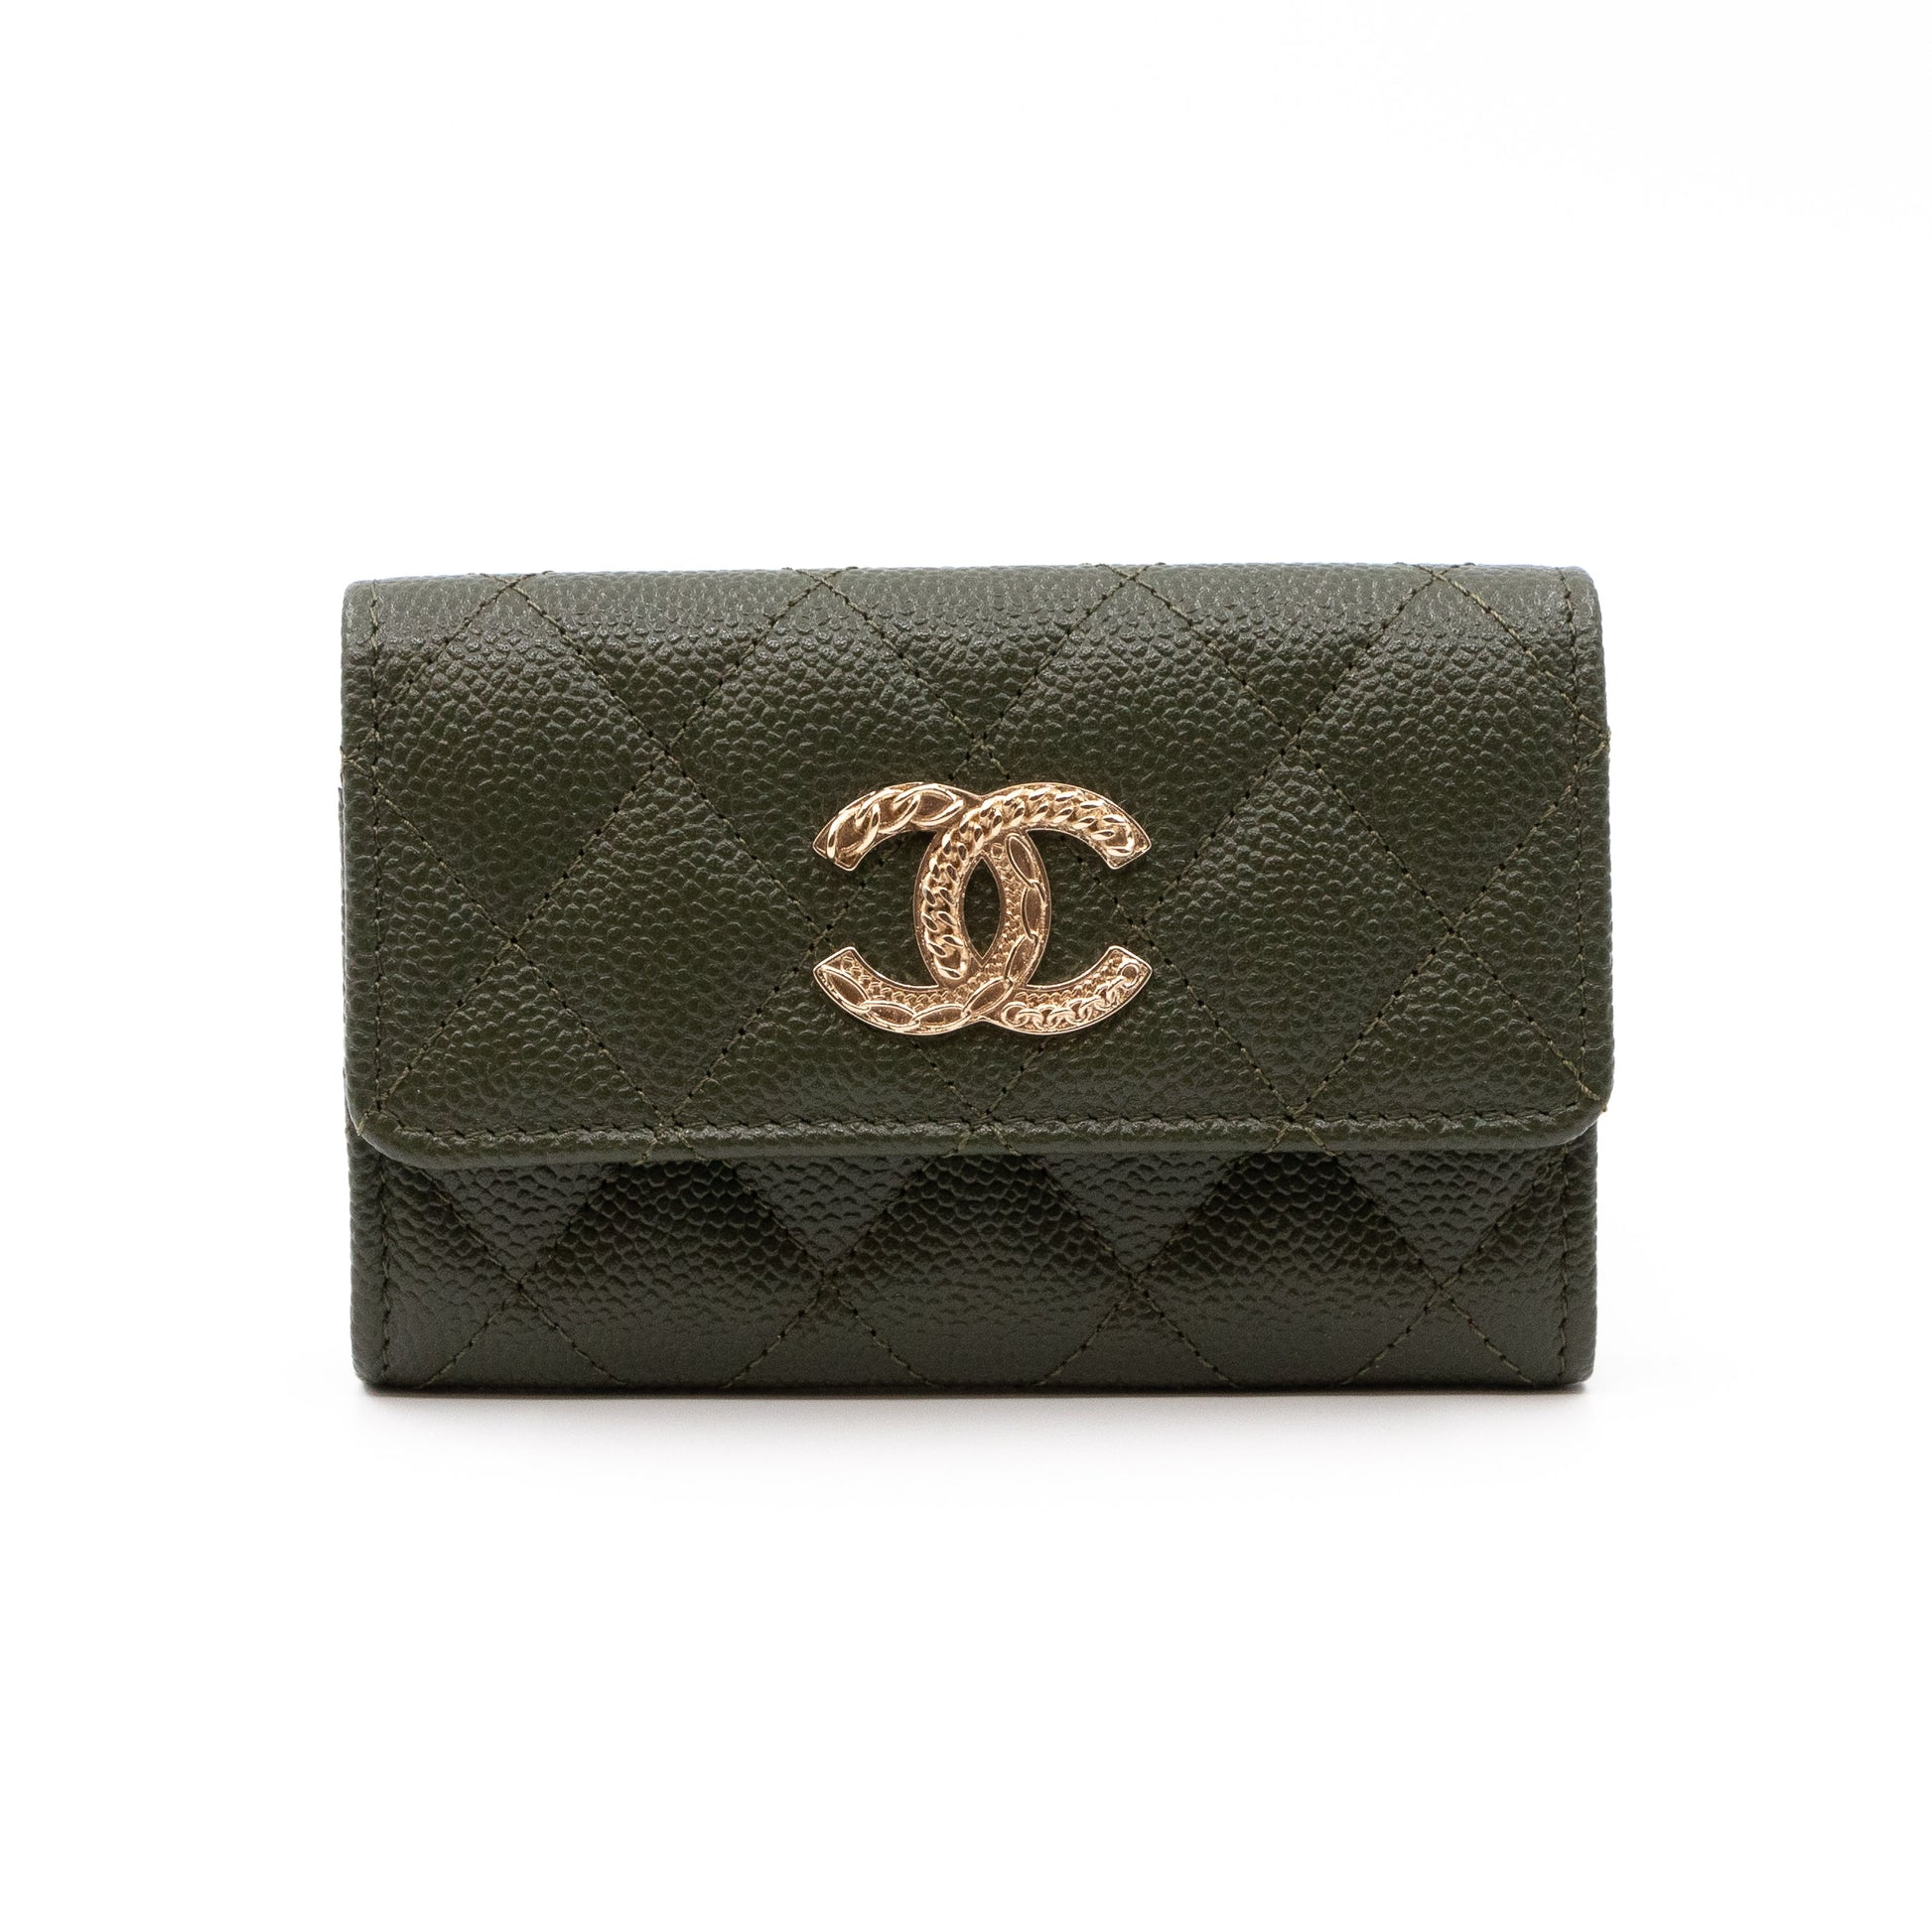 Chanel – Chanel CC Engraved Flap Card Case Olive Green Caviar Gold